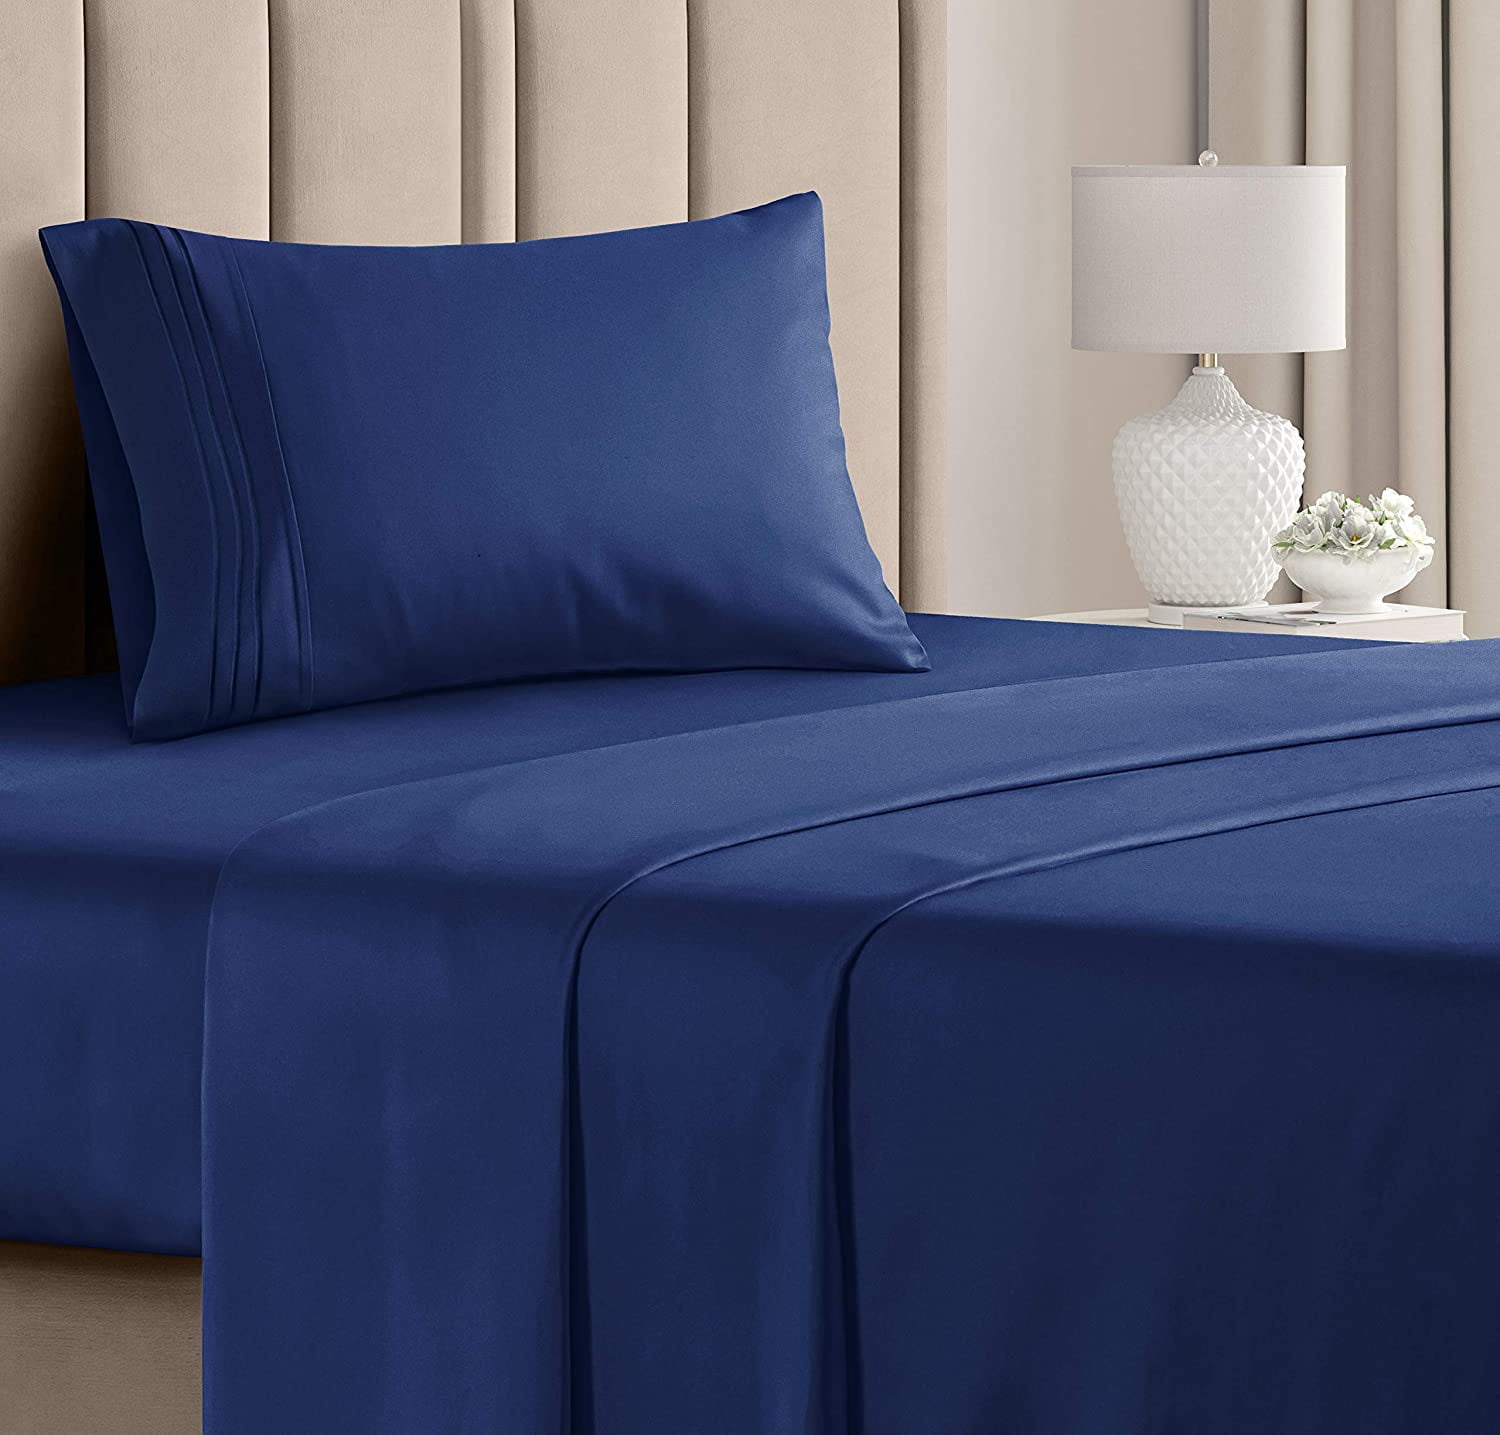 Hotel Luxury Bed Sheets, California King Bed Sheets Sets